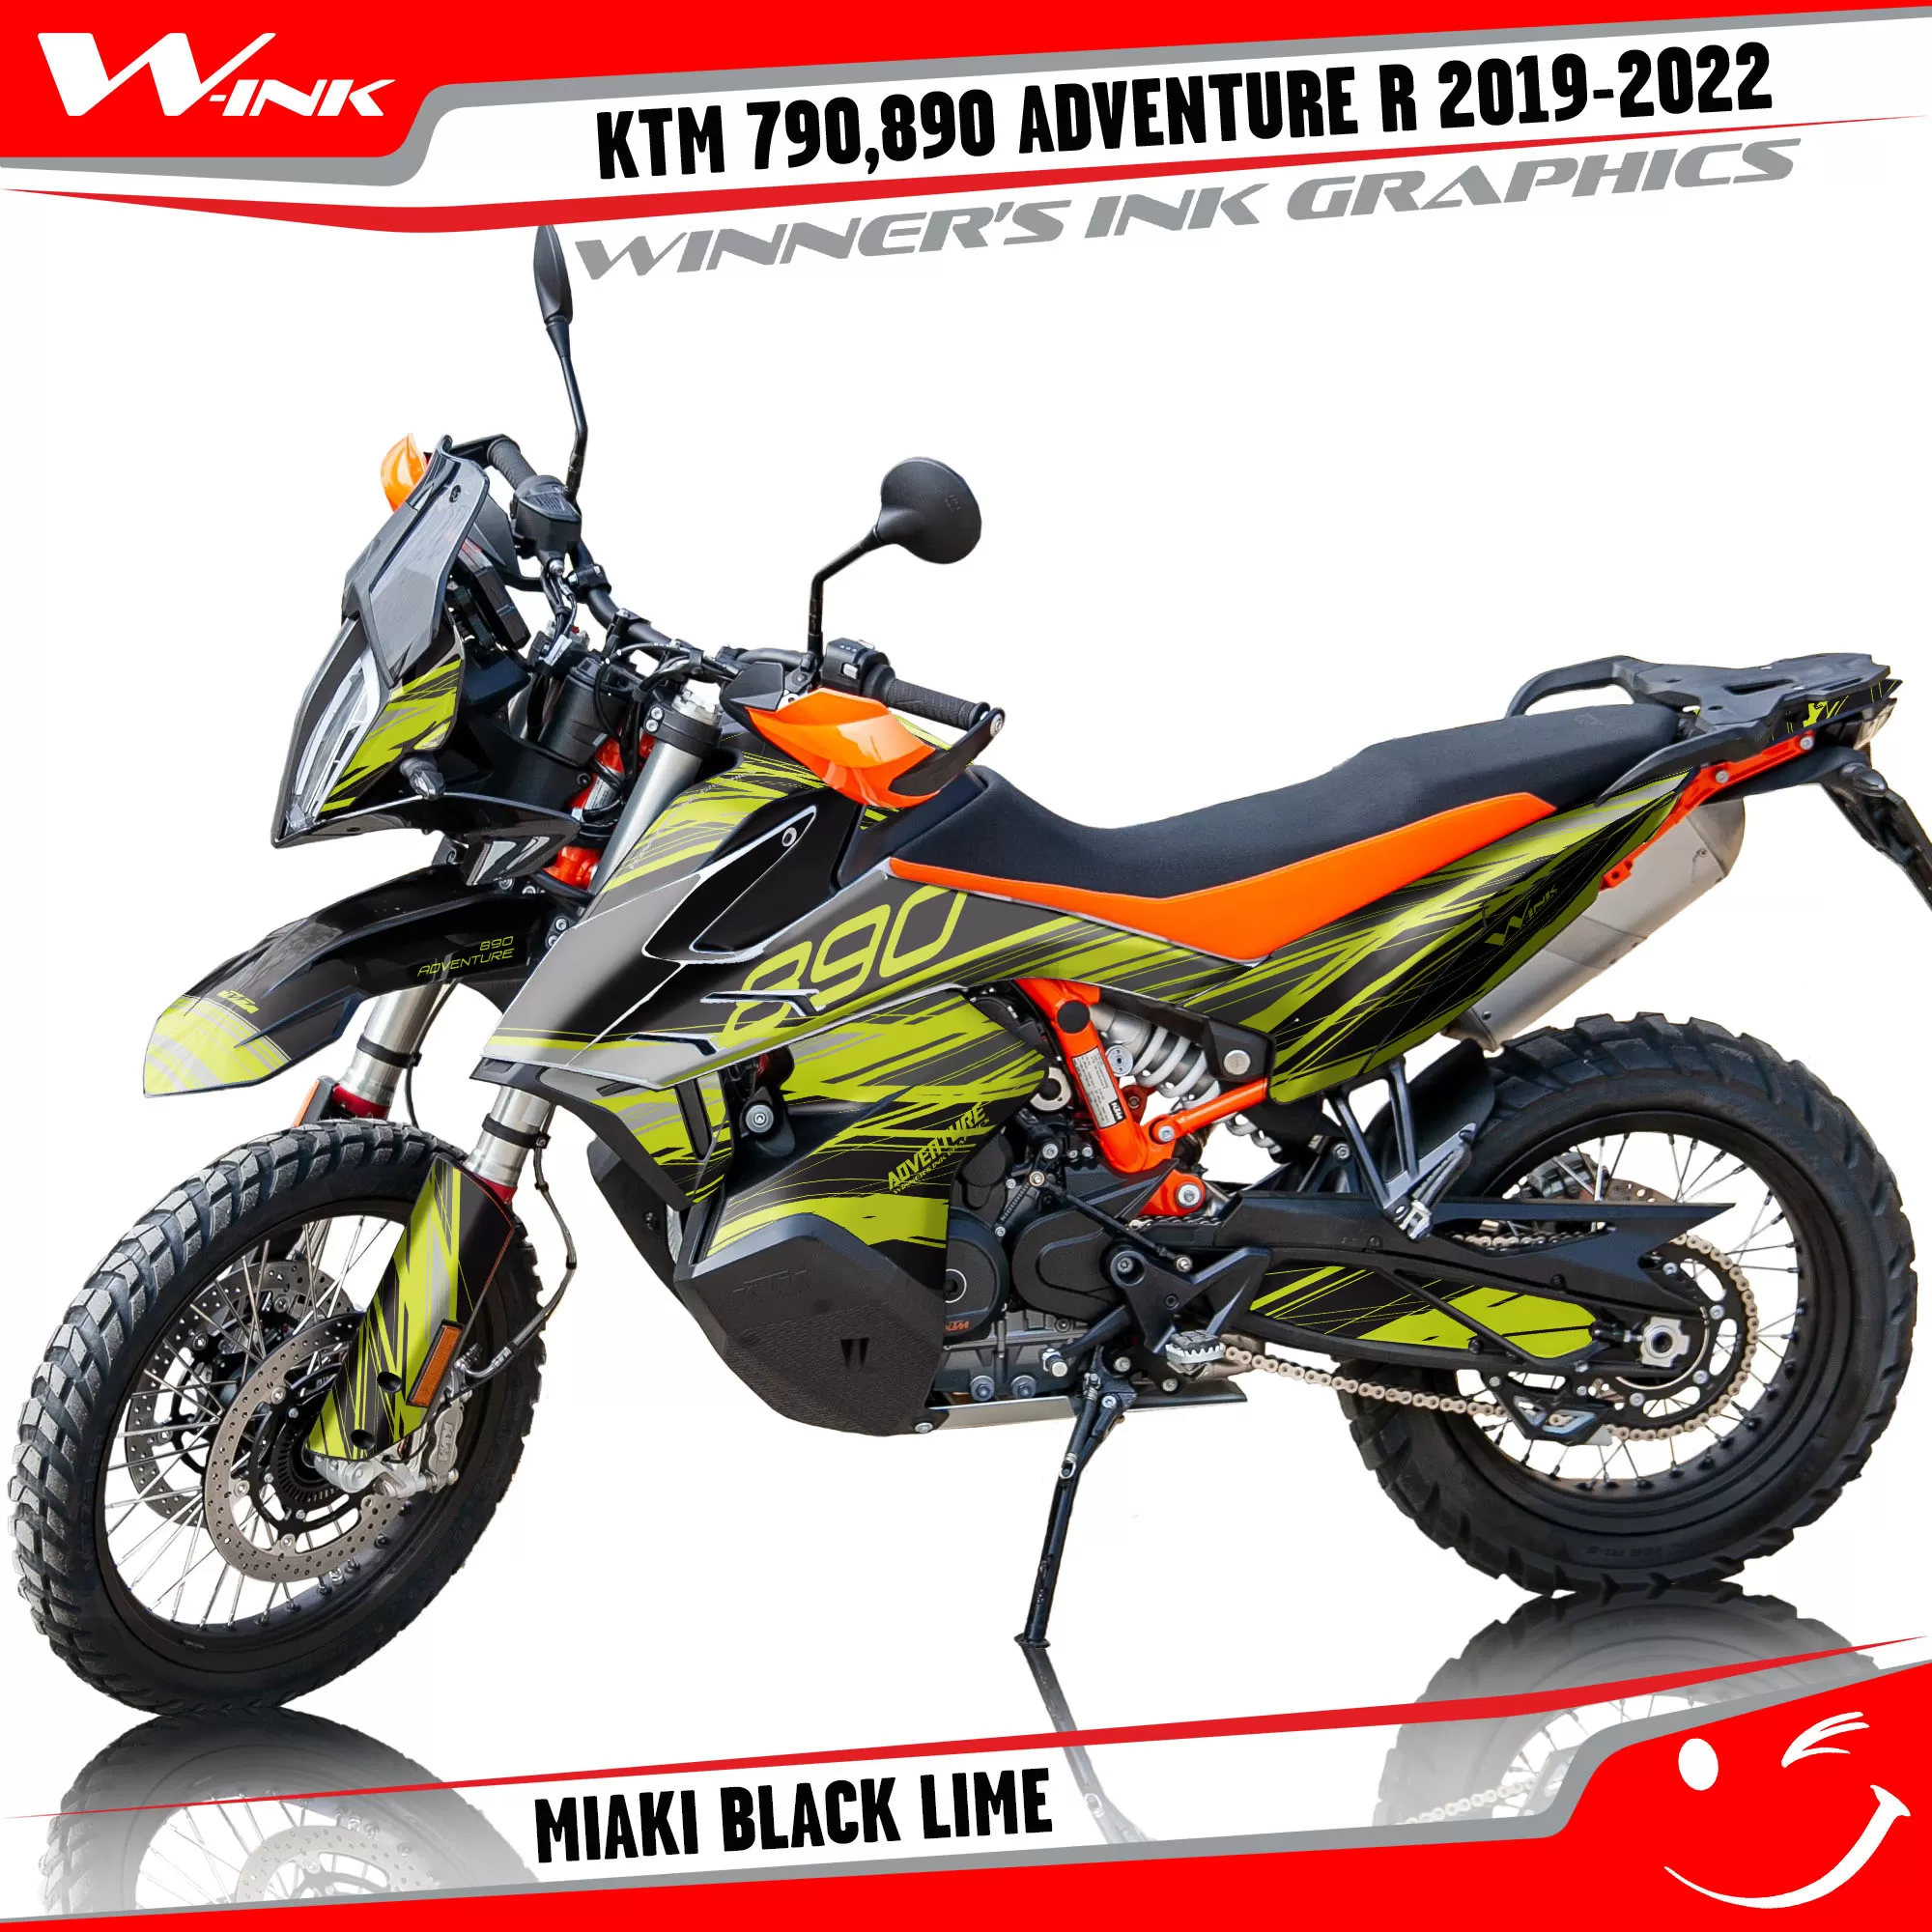 Adventure-R-790-890-2019-2020-2021-2022-graphics-kit-and-decals-with-designs-Miaki-Black-Lime